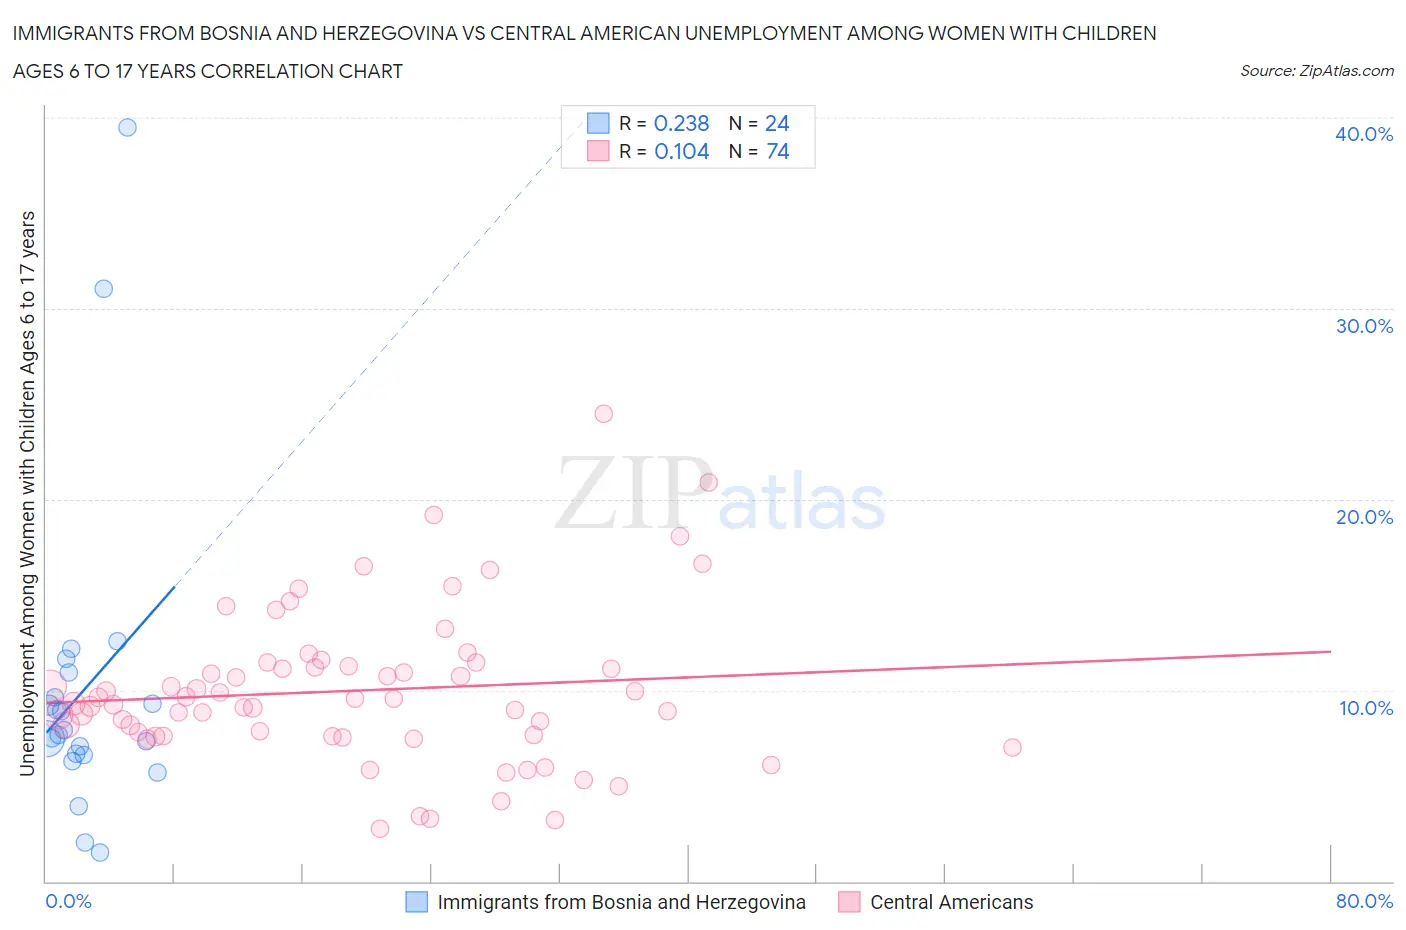 Immigrants from Bosnia and Herzegovina vs Central American Unemployment Among Women with Children Ages 6 to 17 years